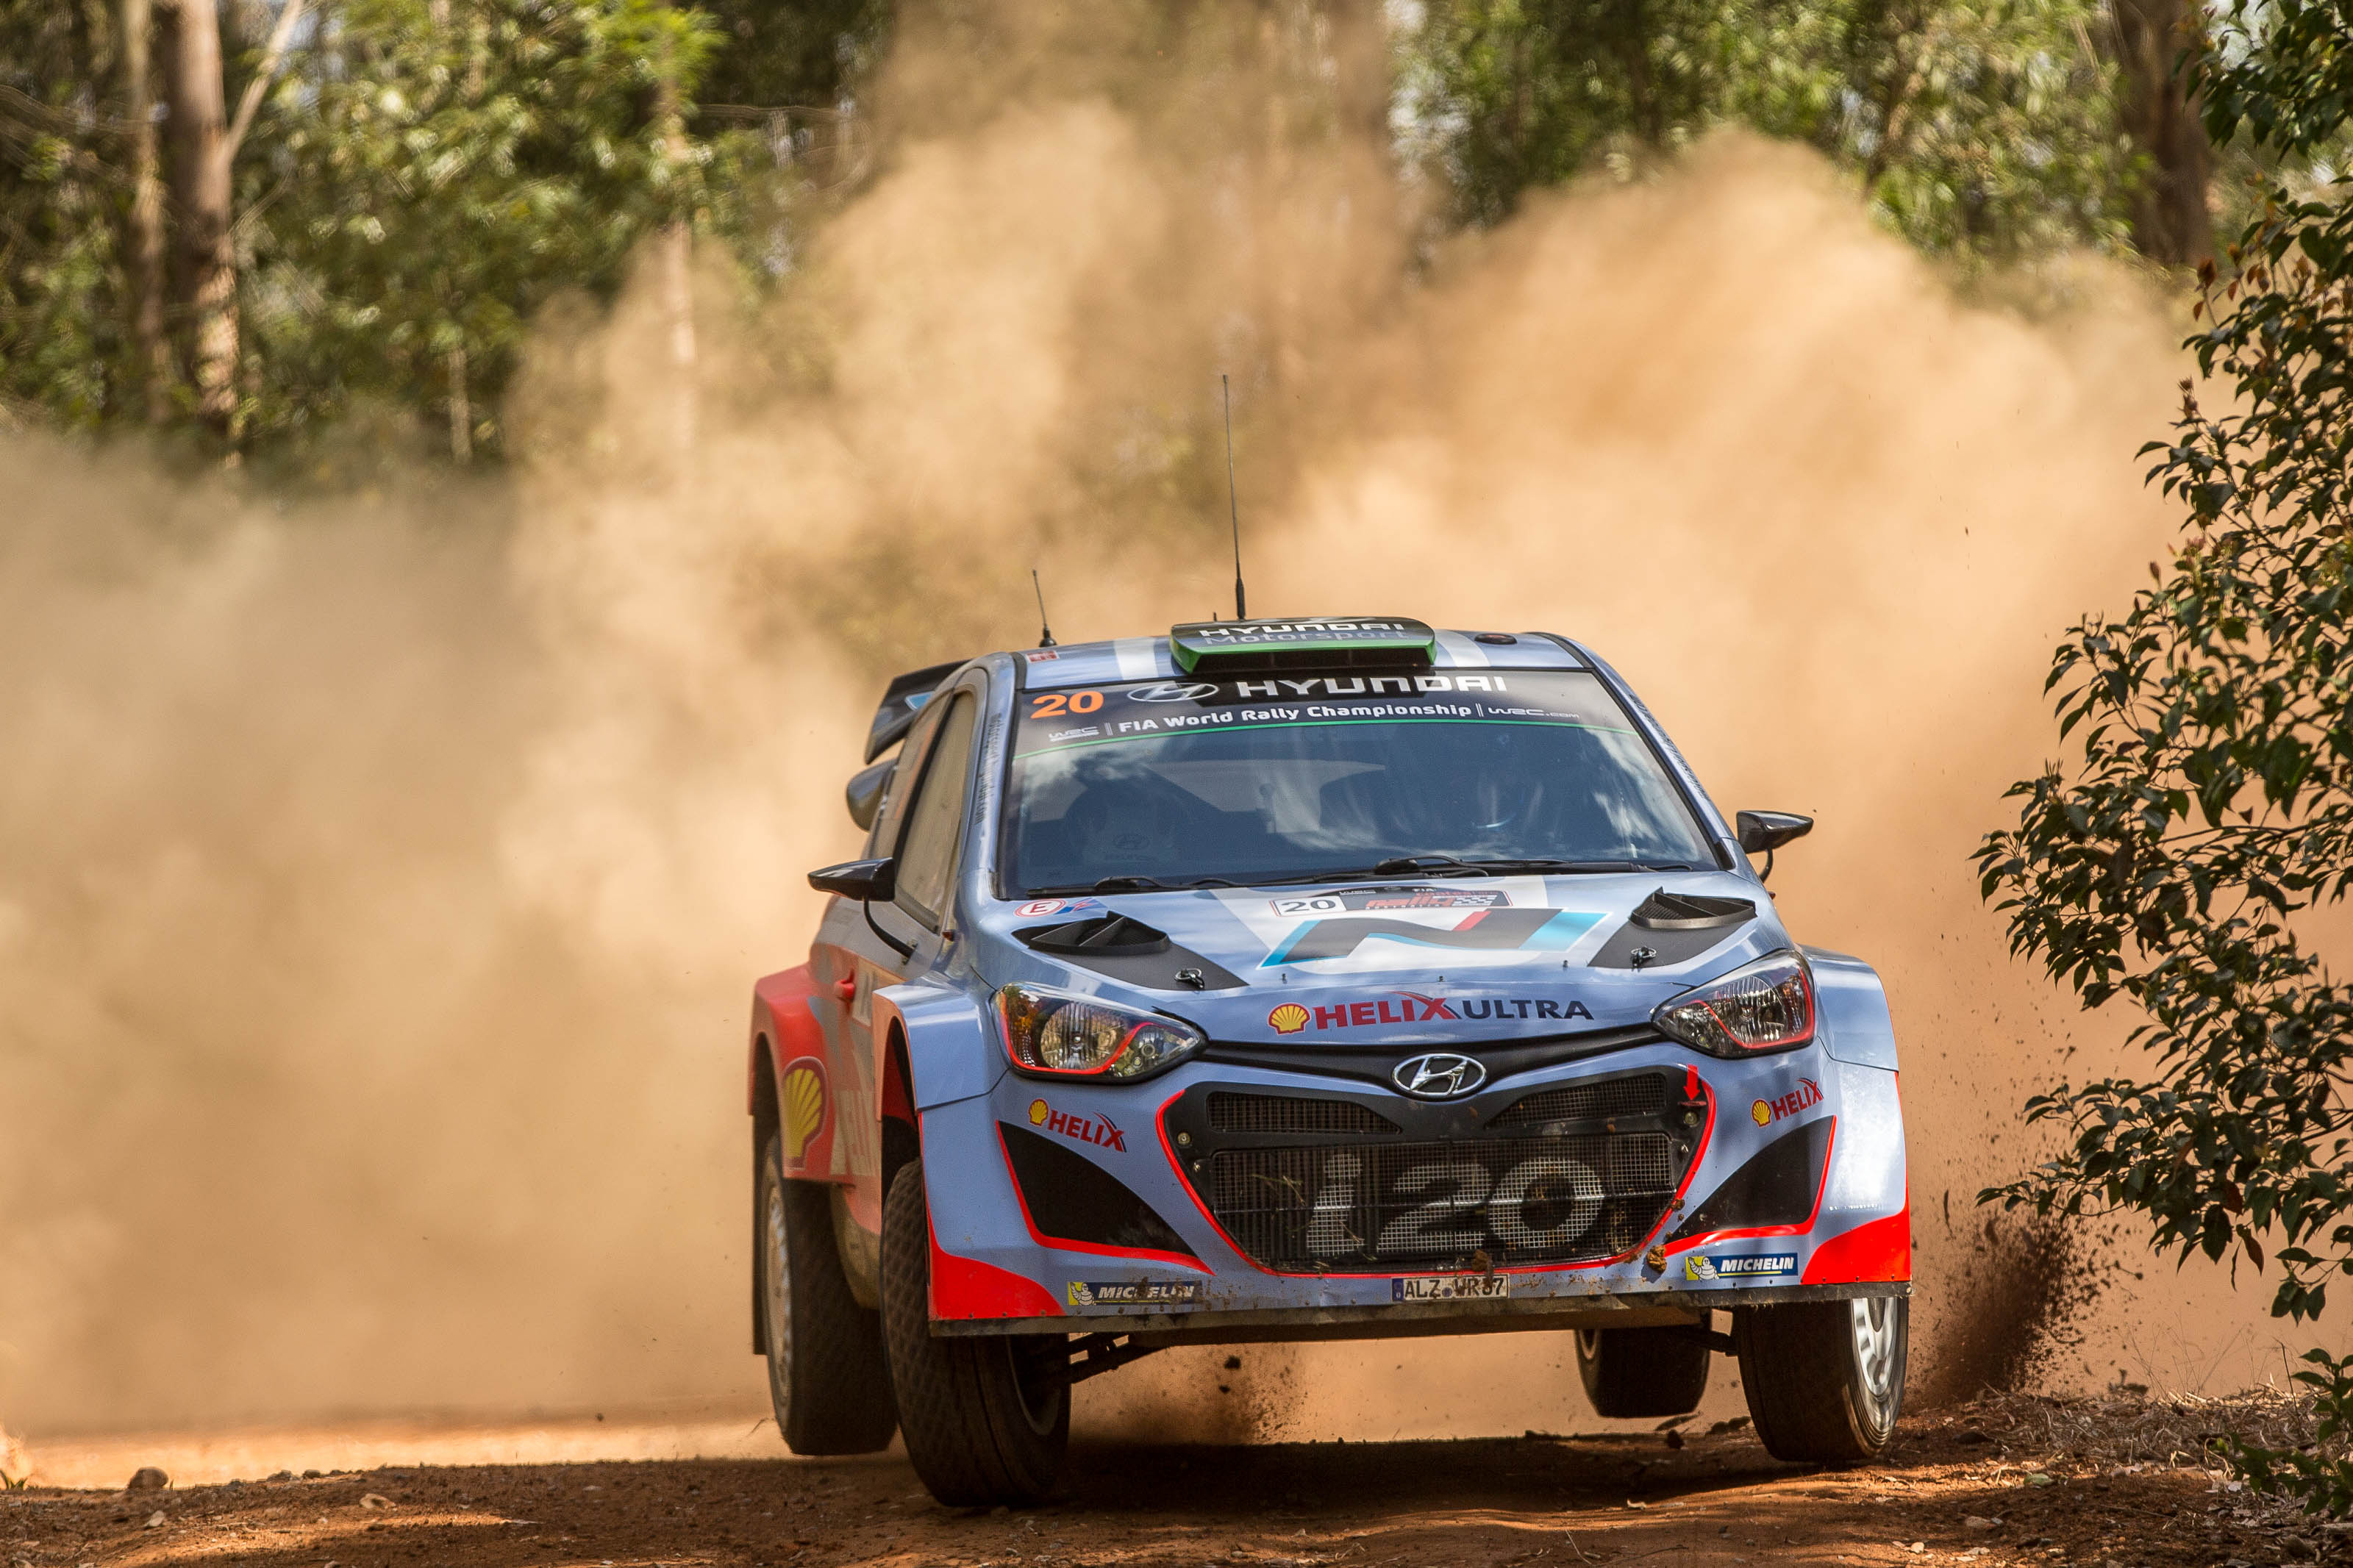 WRC Australia: Paddon holding sixth place after Day One